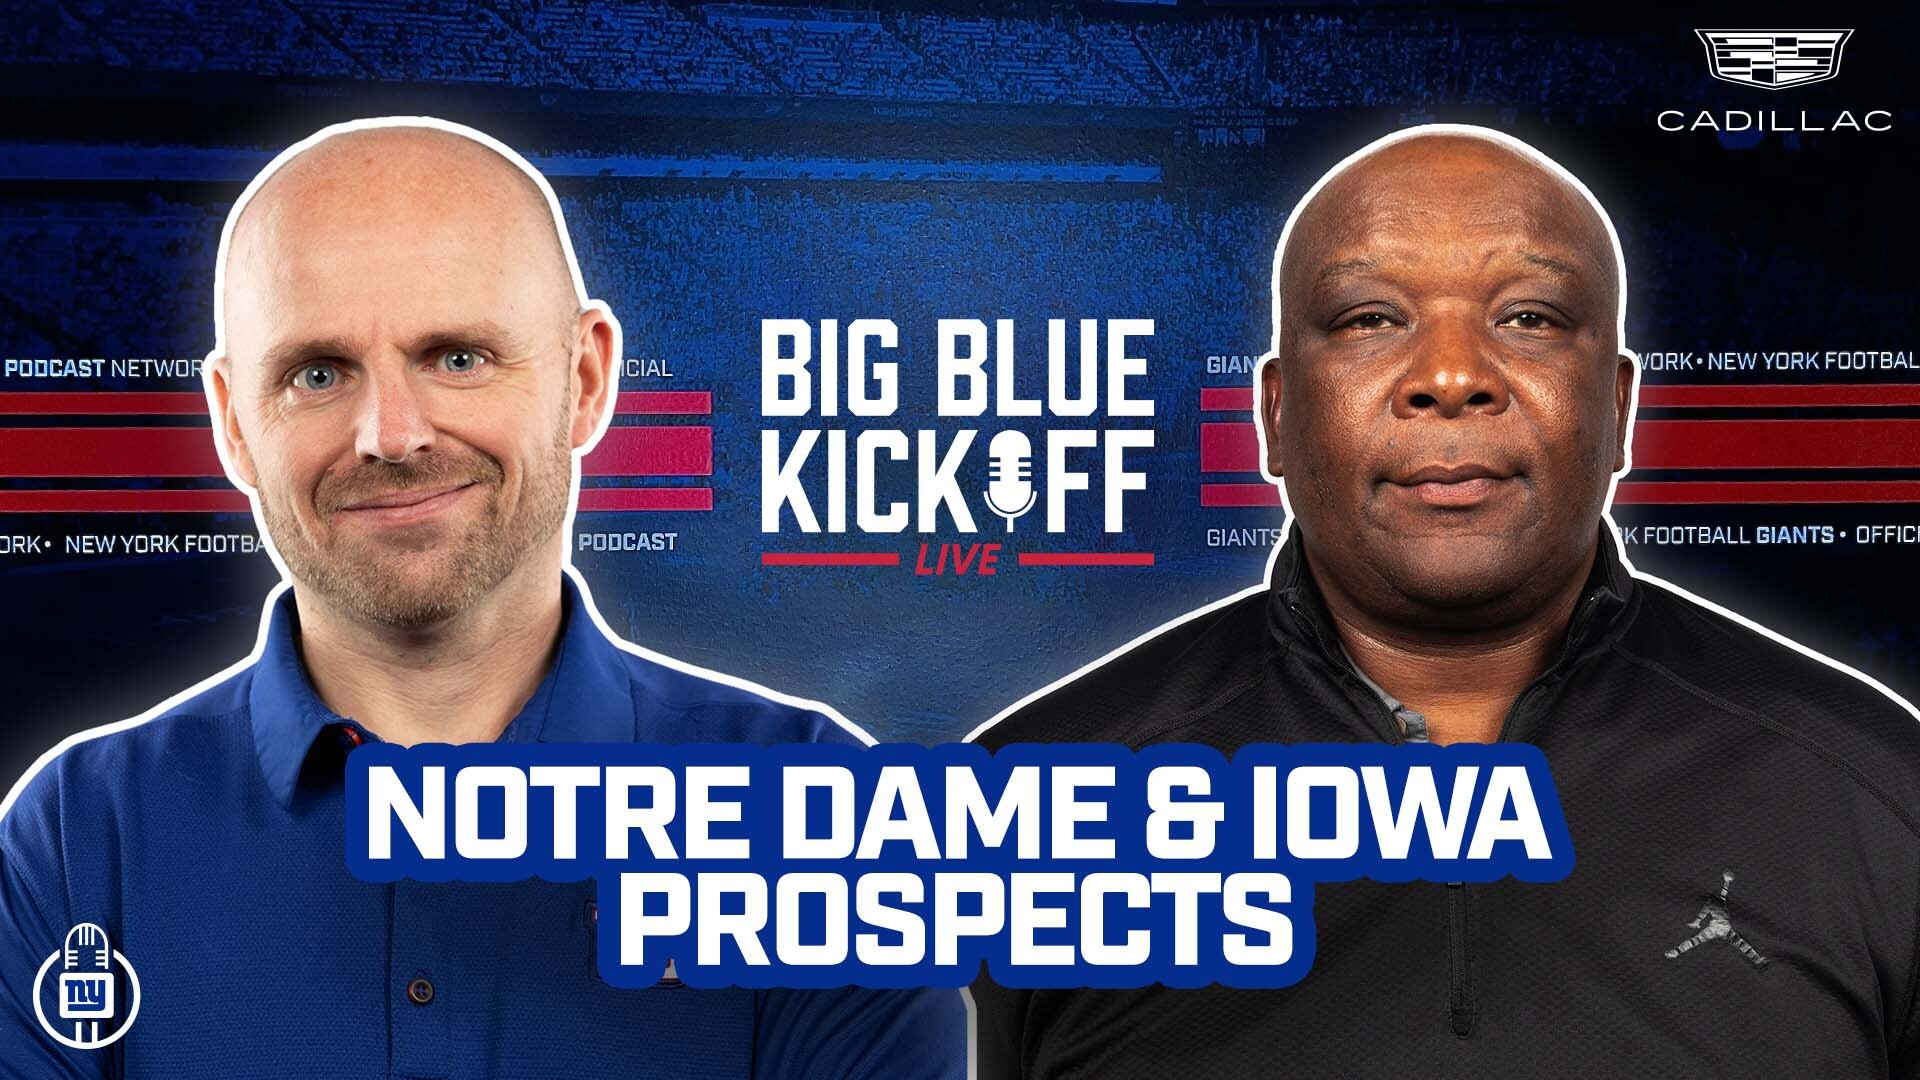 Big Blue Kickoff Live 4/9 | Notre Dame and Iowa Prospects